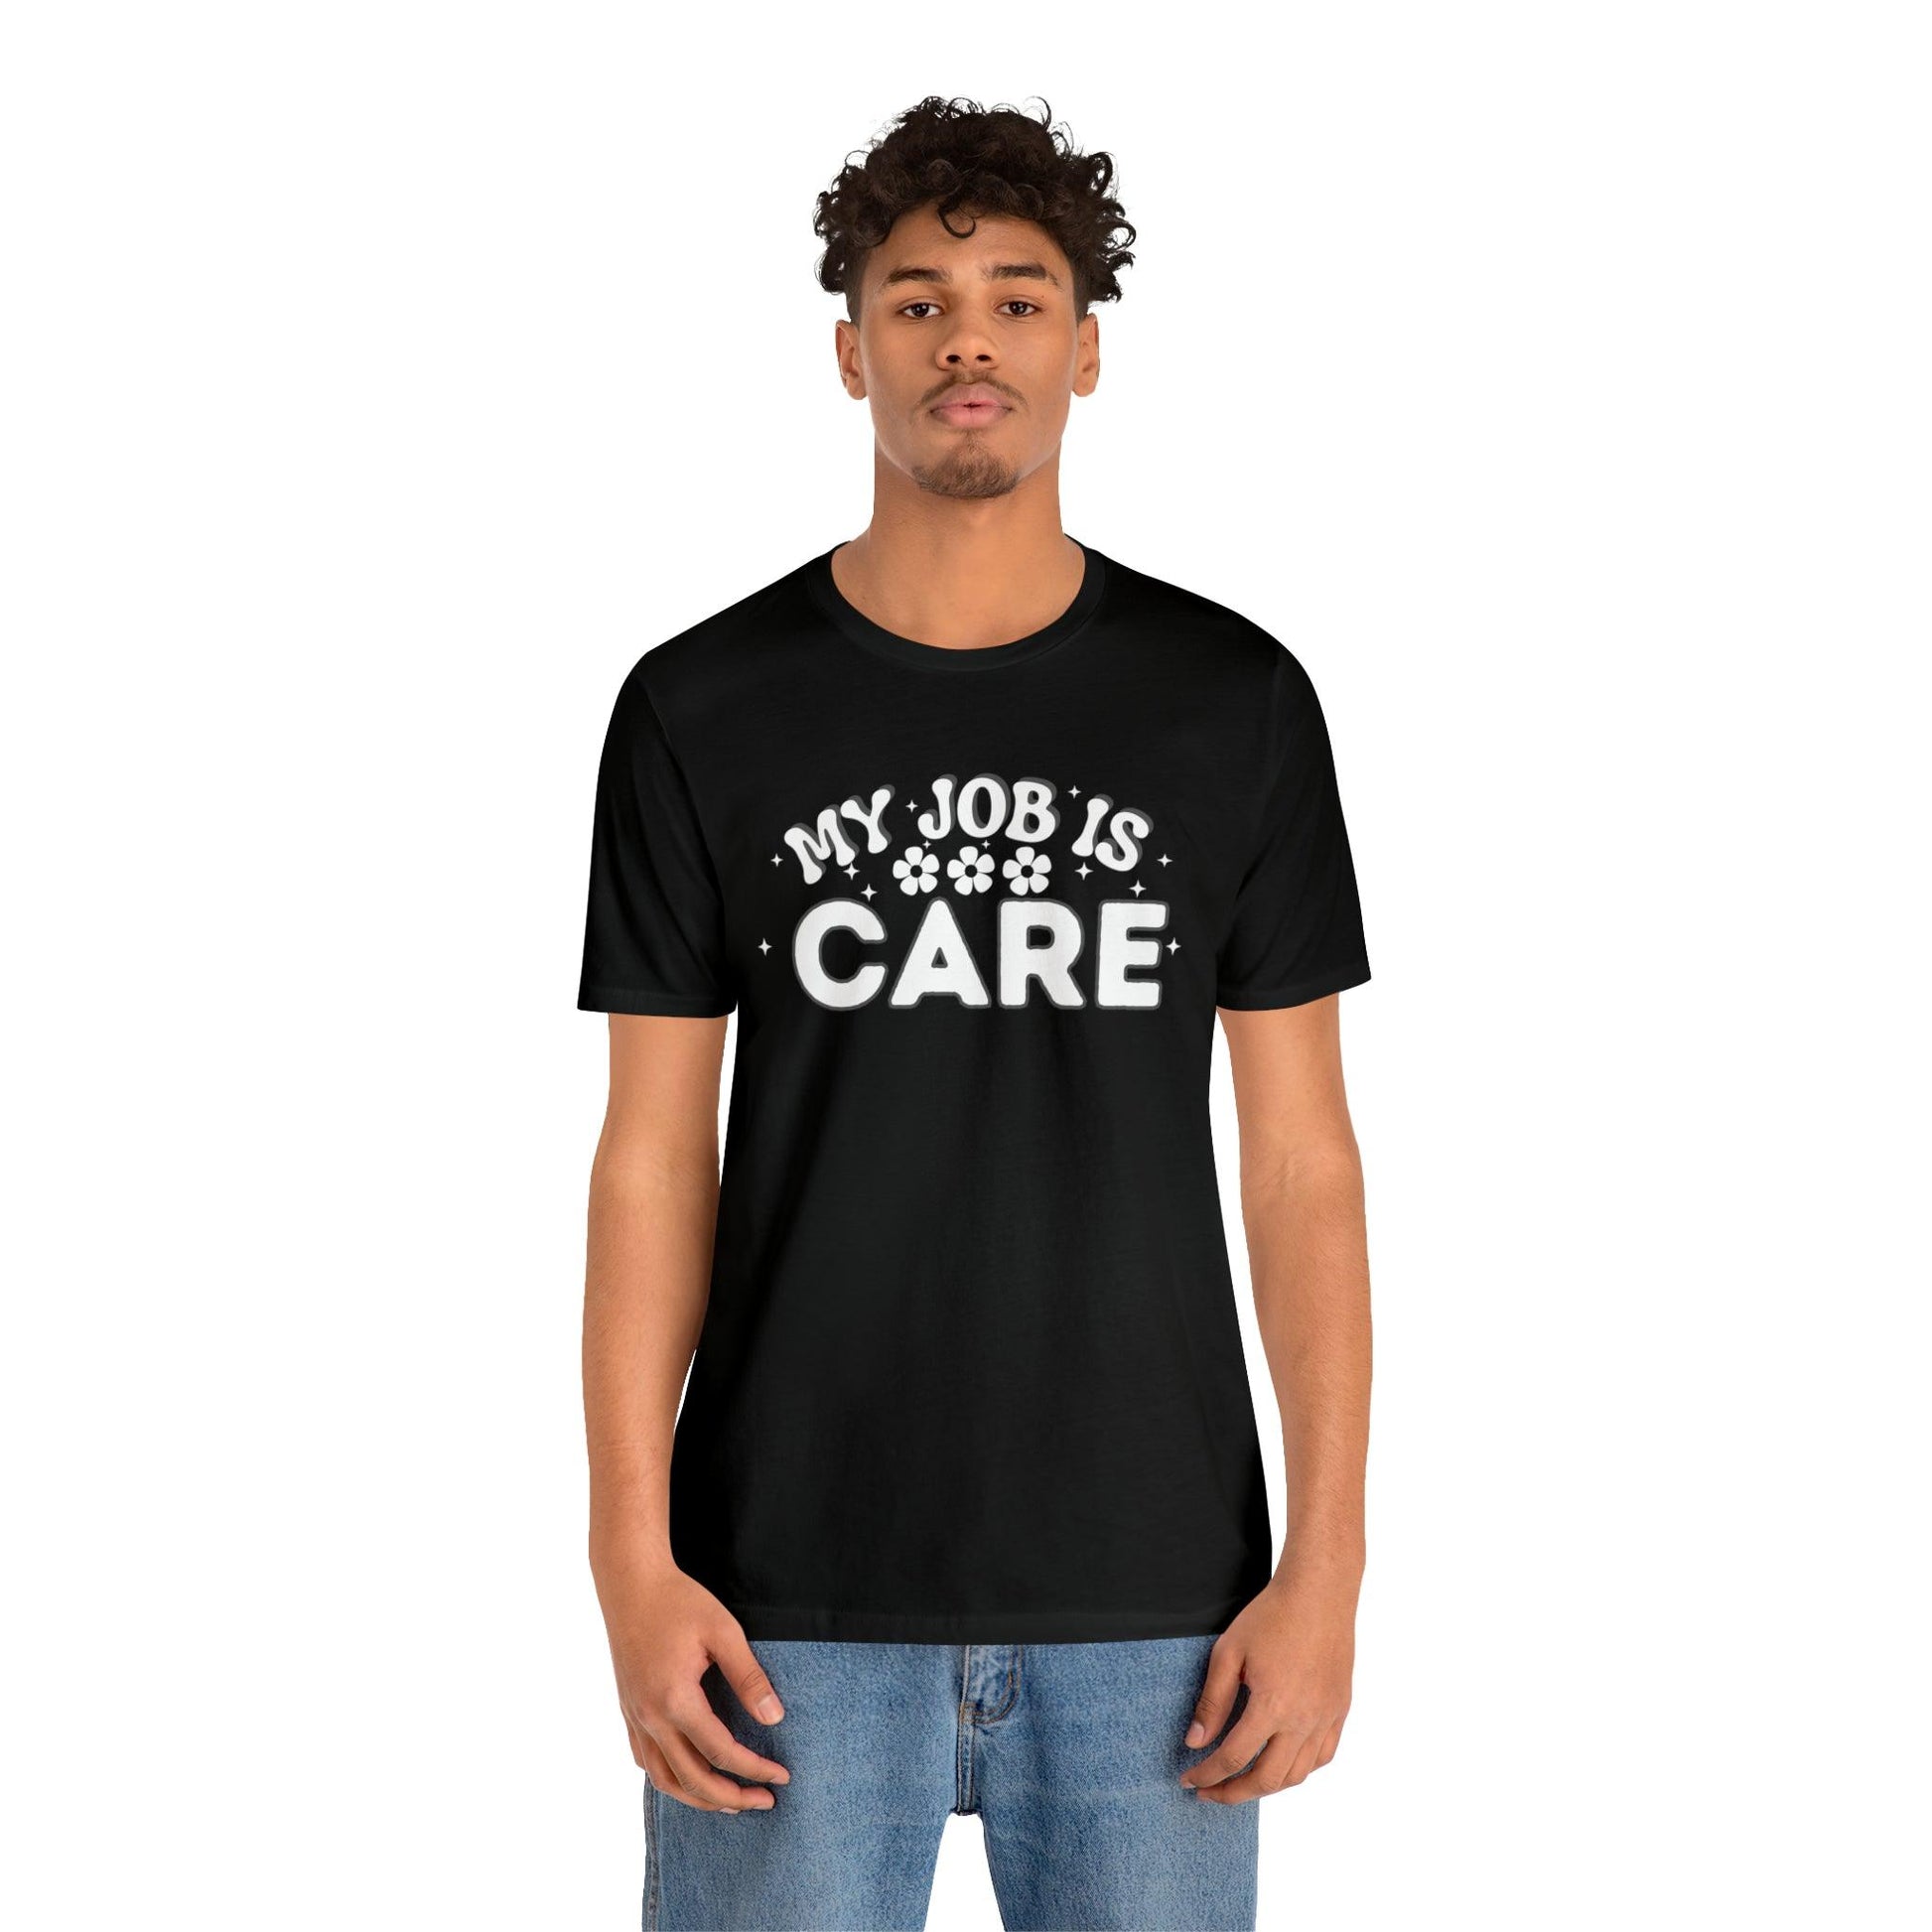 My Job is Care Shirt Doctor, Nurse, Caregiver, Social Worker, Psychologist, Therapist, Paramedic, Childcare provider, Hospice Workers, Animal Caretaker, - Giftsmojo